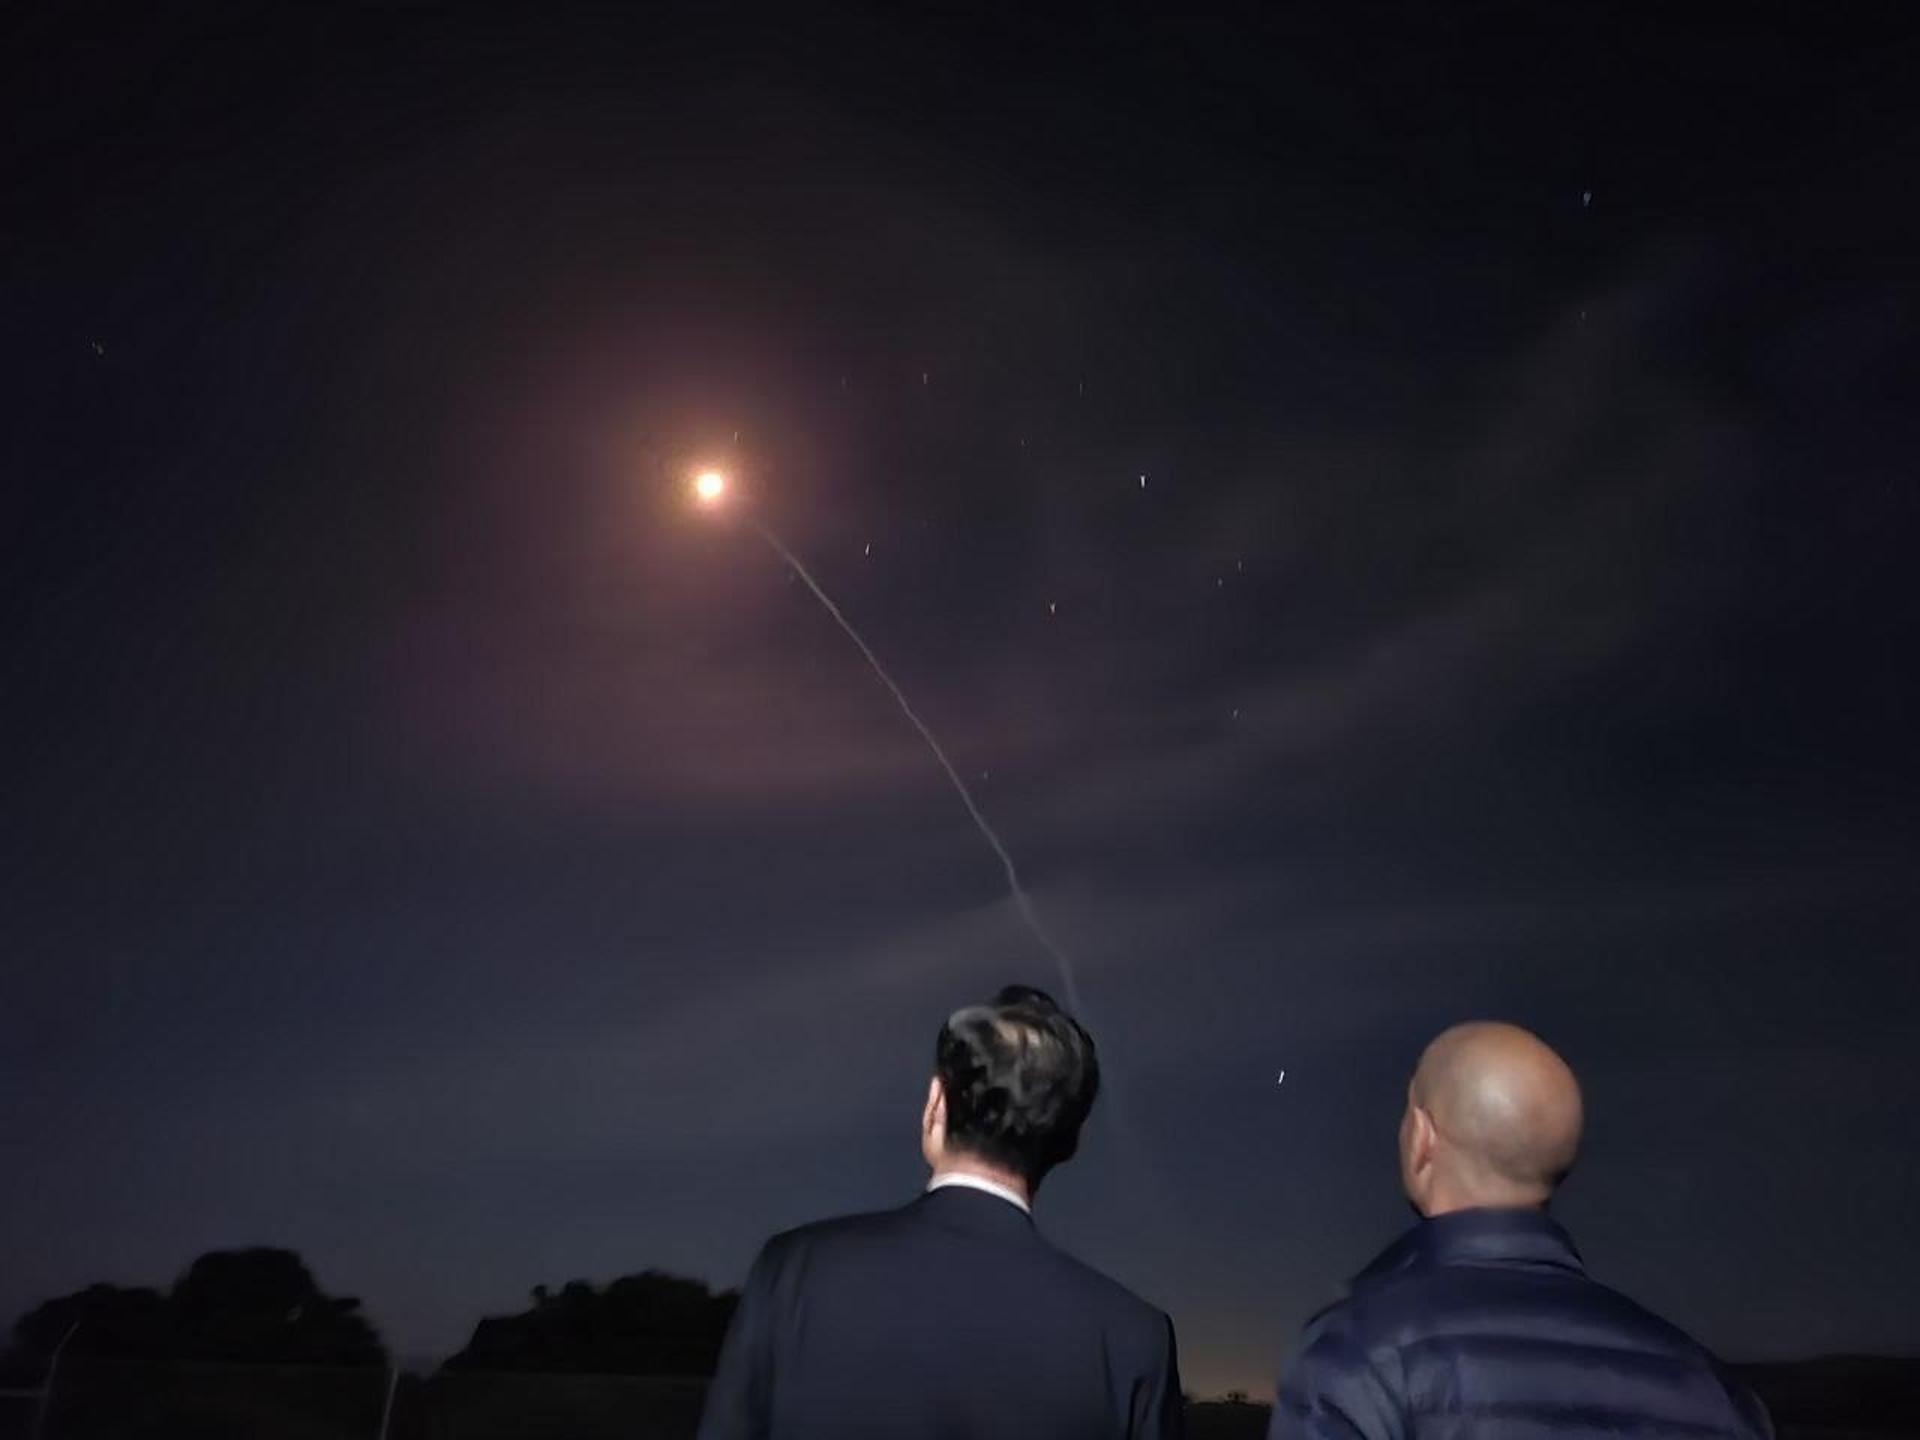 A handout photo made available by the South Korean defense ministry shows South Korean Deputy Minister for Defense Policy Heo Tae-keun (L) and Vipin Narang, US principal deputy assistant secretary of defense for space policy, observing a test of a Minuteman III intercontinental ballistic missile at Vandenberg Air Force Base in California, US, 31 October 2023 EFE-EPA/YONHAP/HANDOUT SOUTH KOREA OUT HANDOUT EDITORIAL USE ONLY/NO SALES